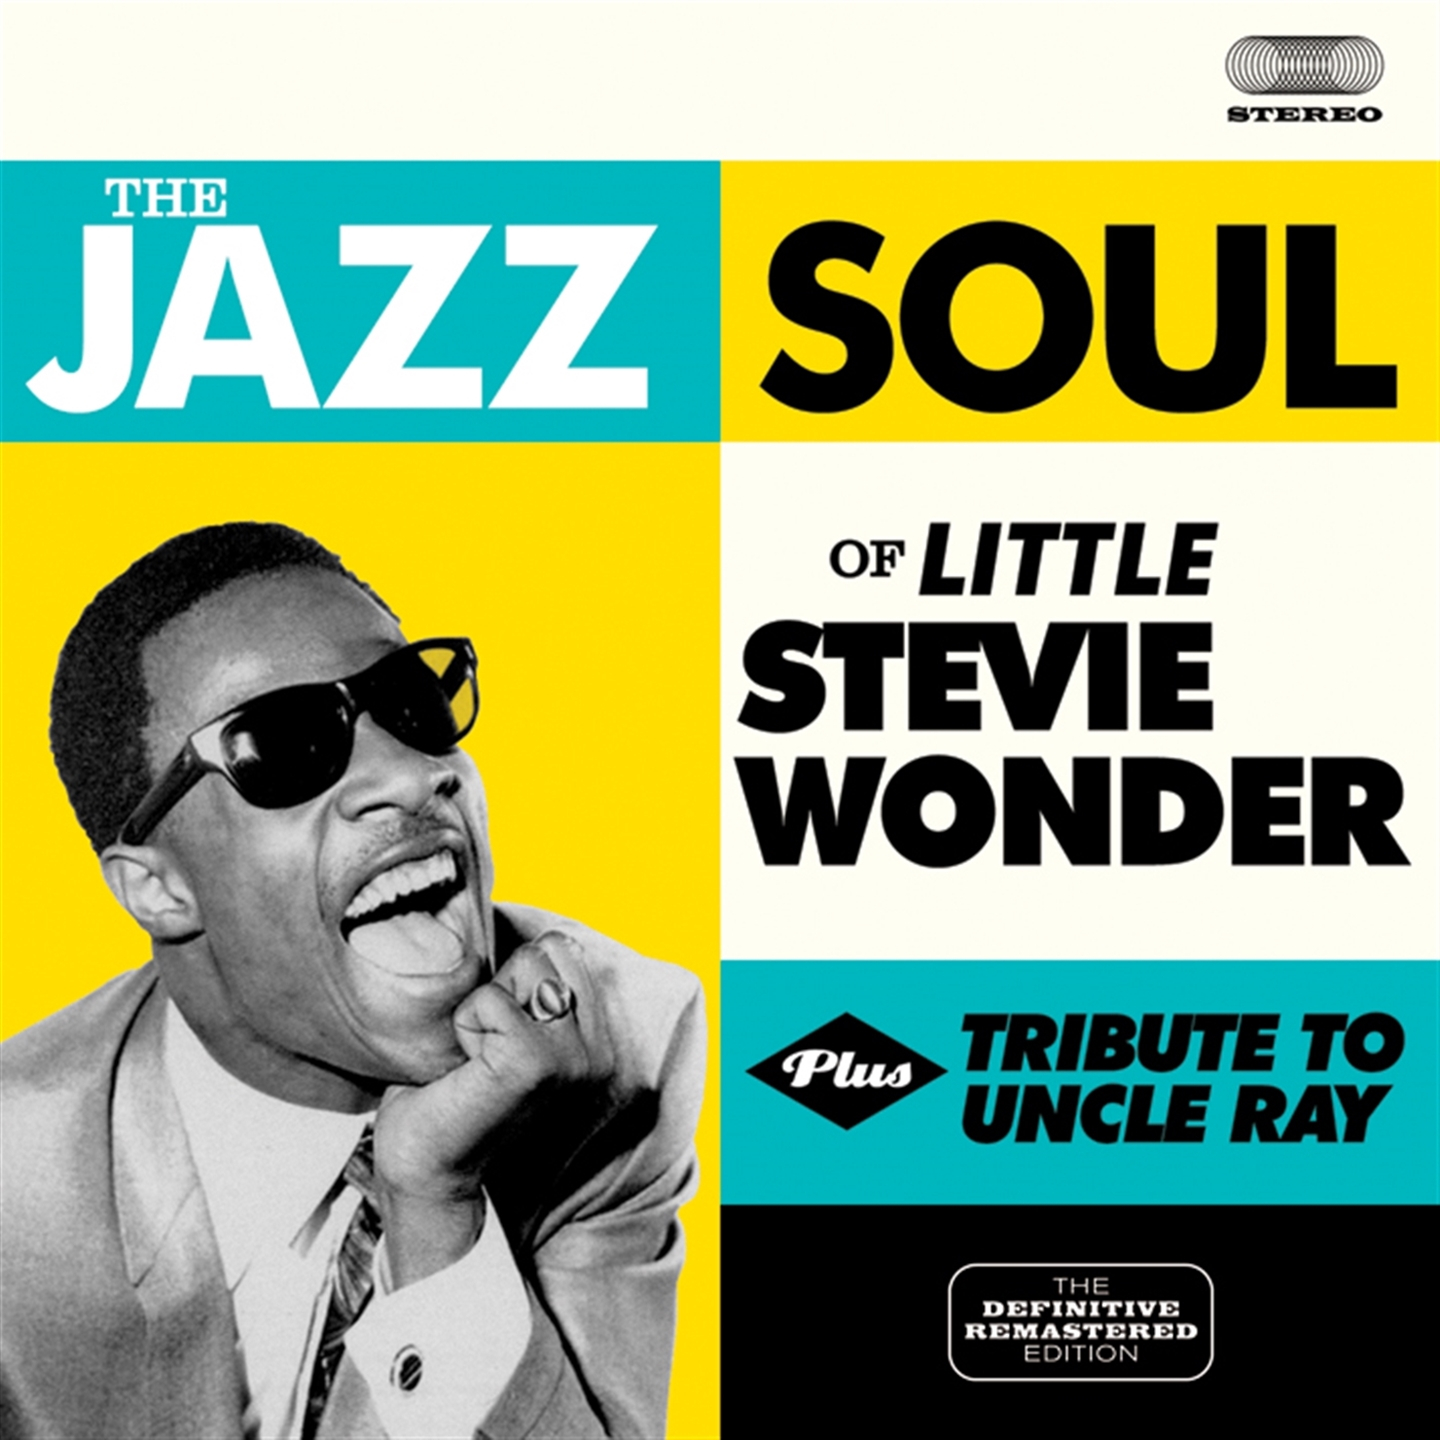 THE JAZZ SOUL OF LITTLE STEVIE (+ TRIBUTE TO UNCLE RAY)